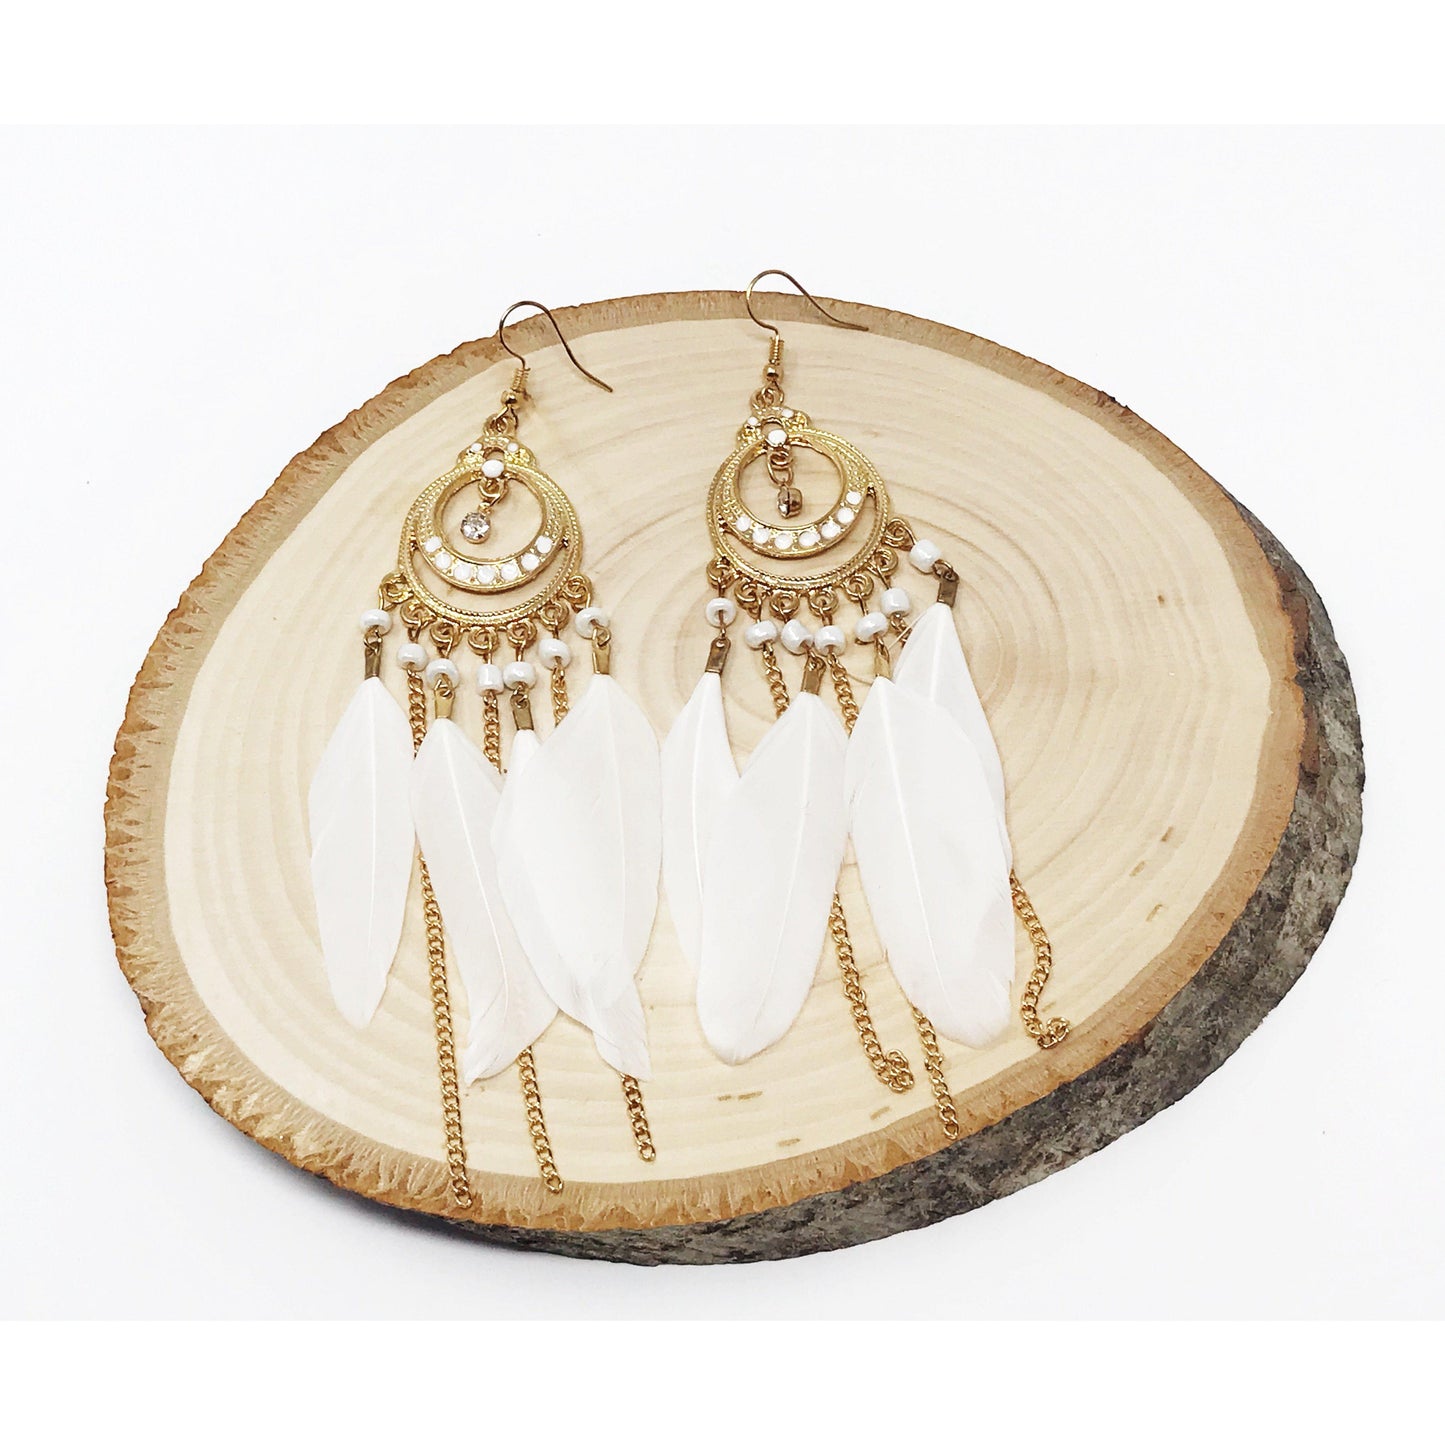 White Feather Dangle Chain Earrings: Elegant Bohemian Accents for Effortlessly Chic Looks